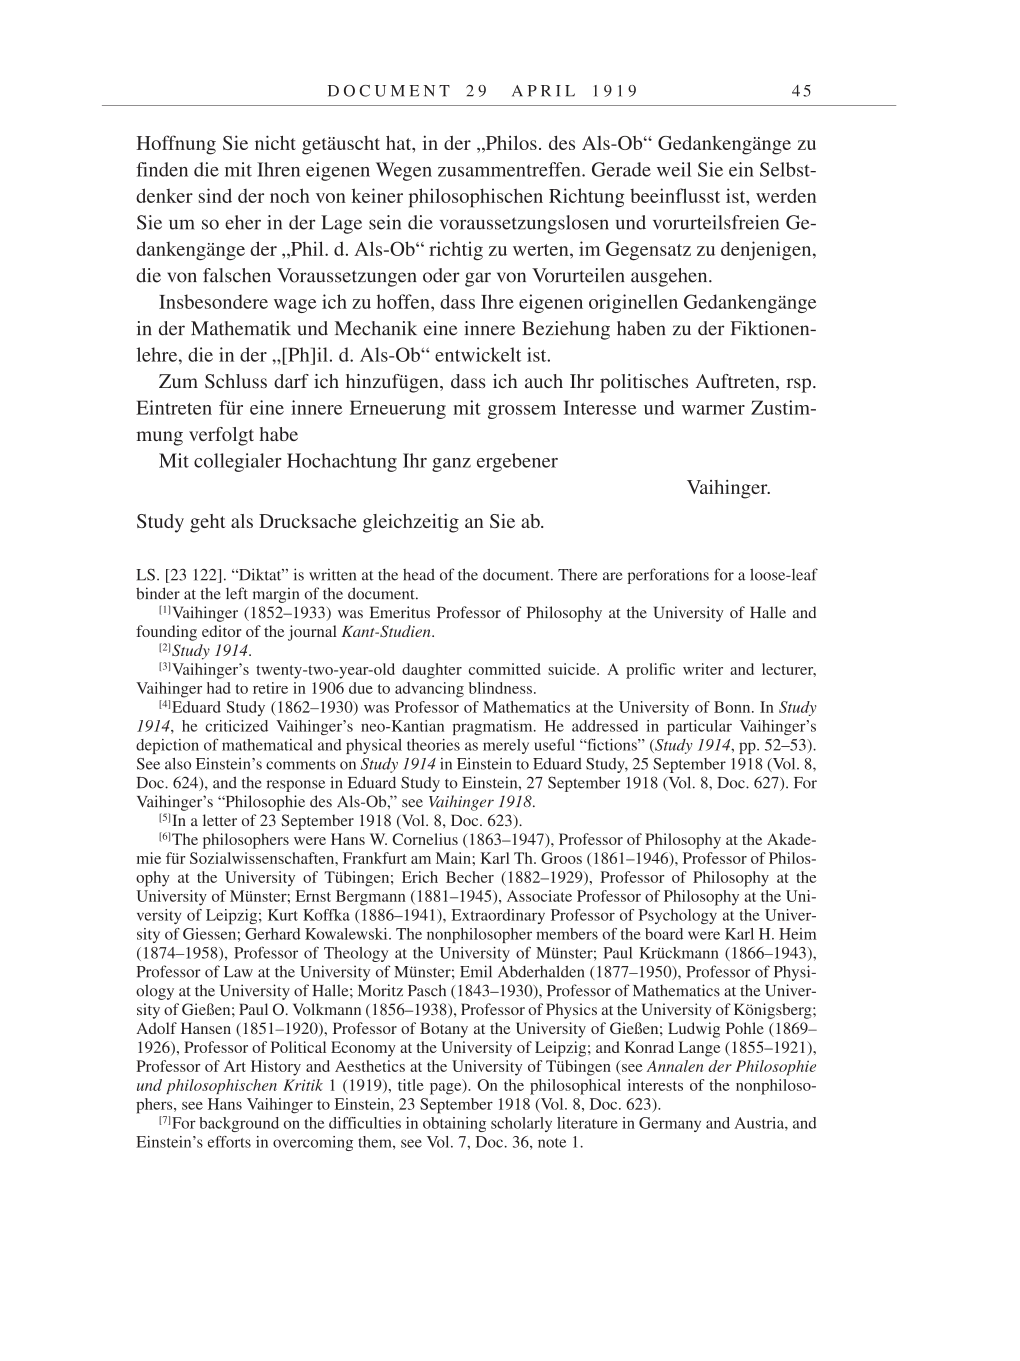 Volume 9: The Berlin Years: Correspondence January 1919-April 1920 page 45